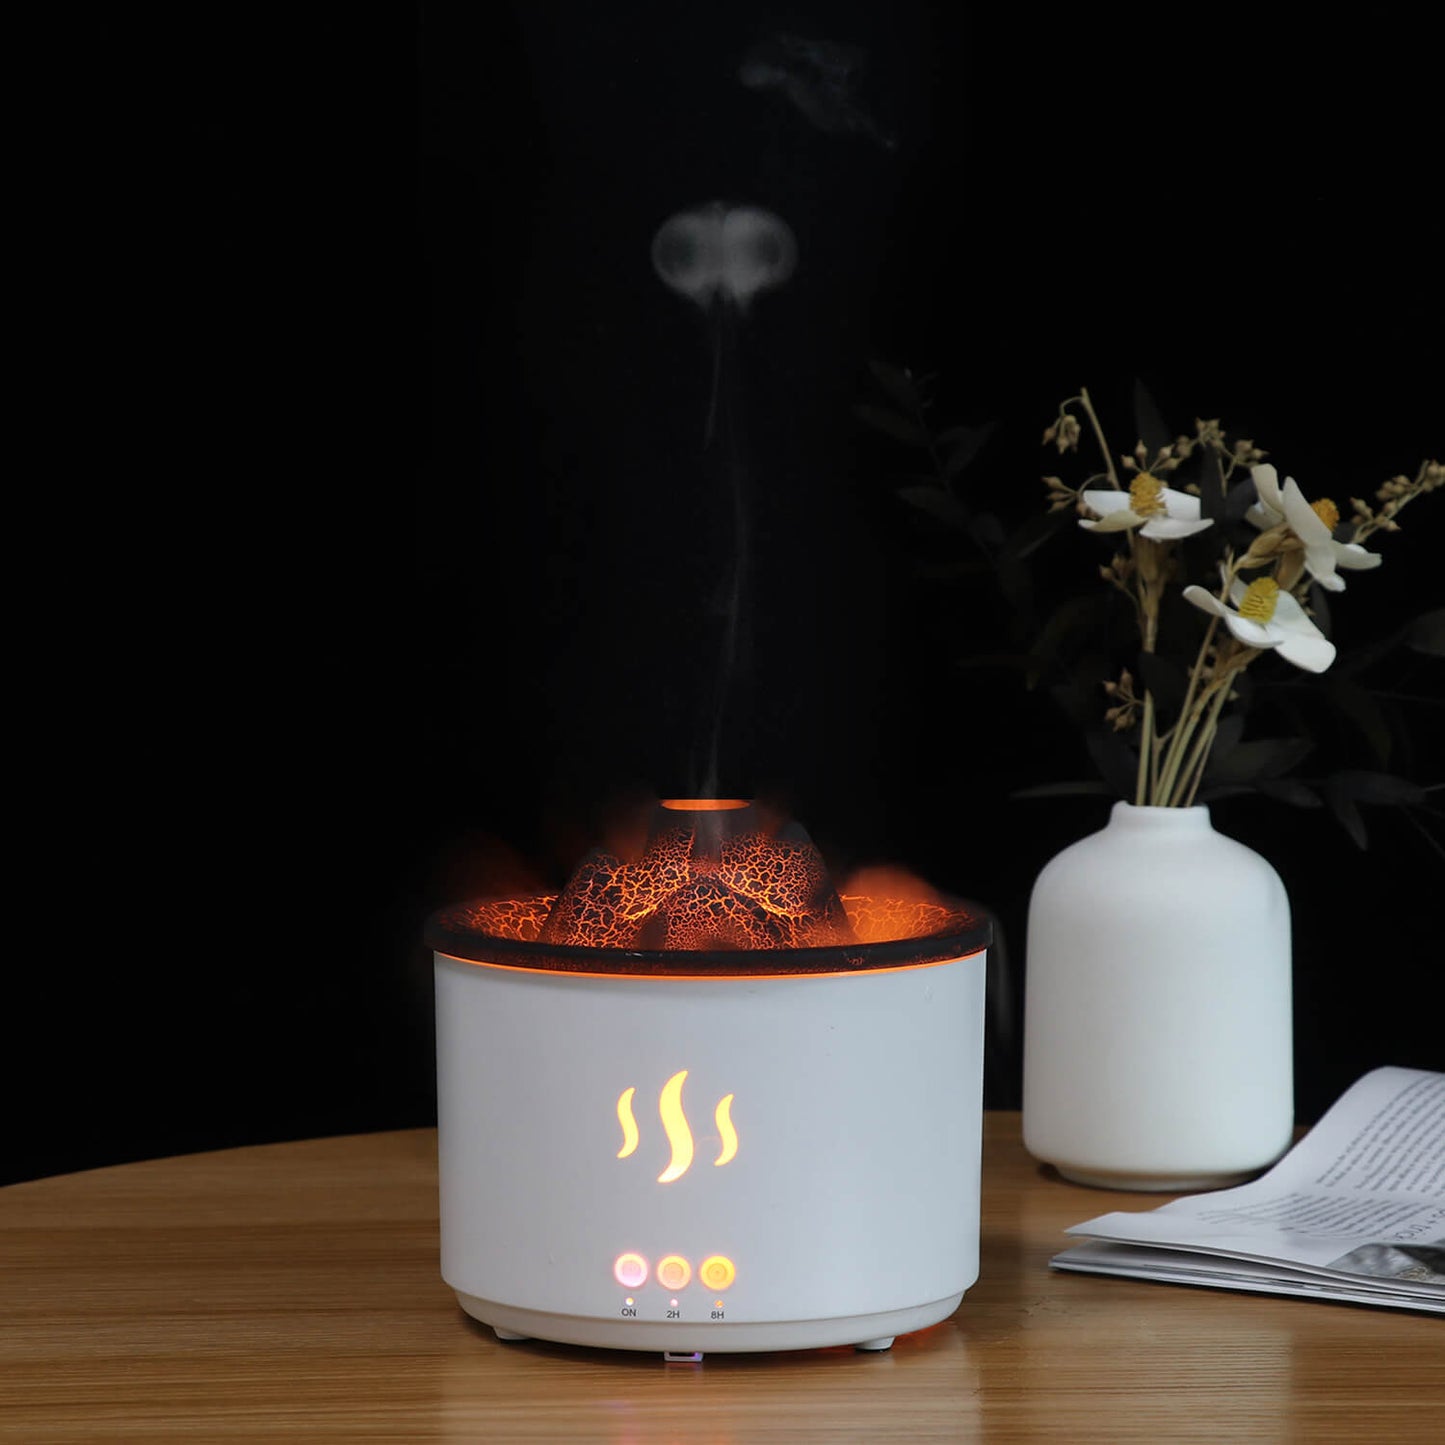 Conveniently control settings with the wireless remote of our Volcano Aroma Humidifier.